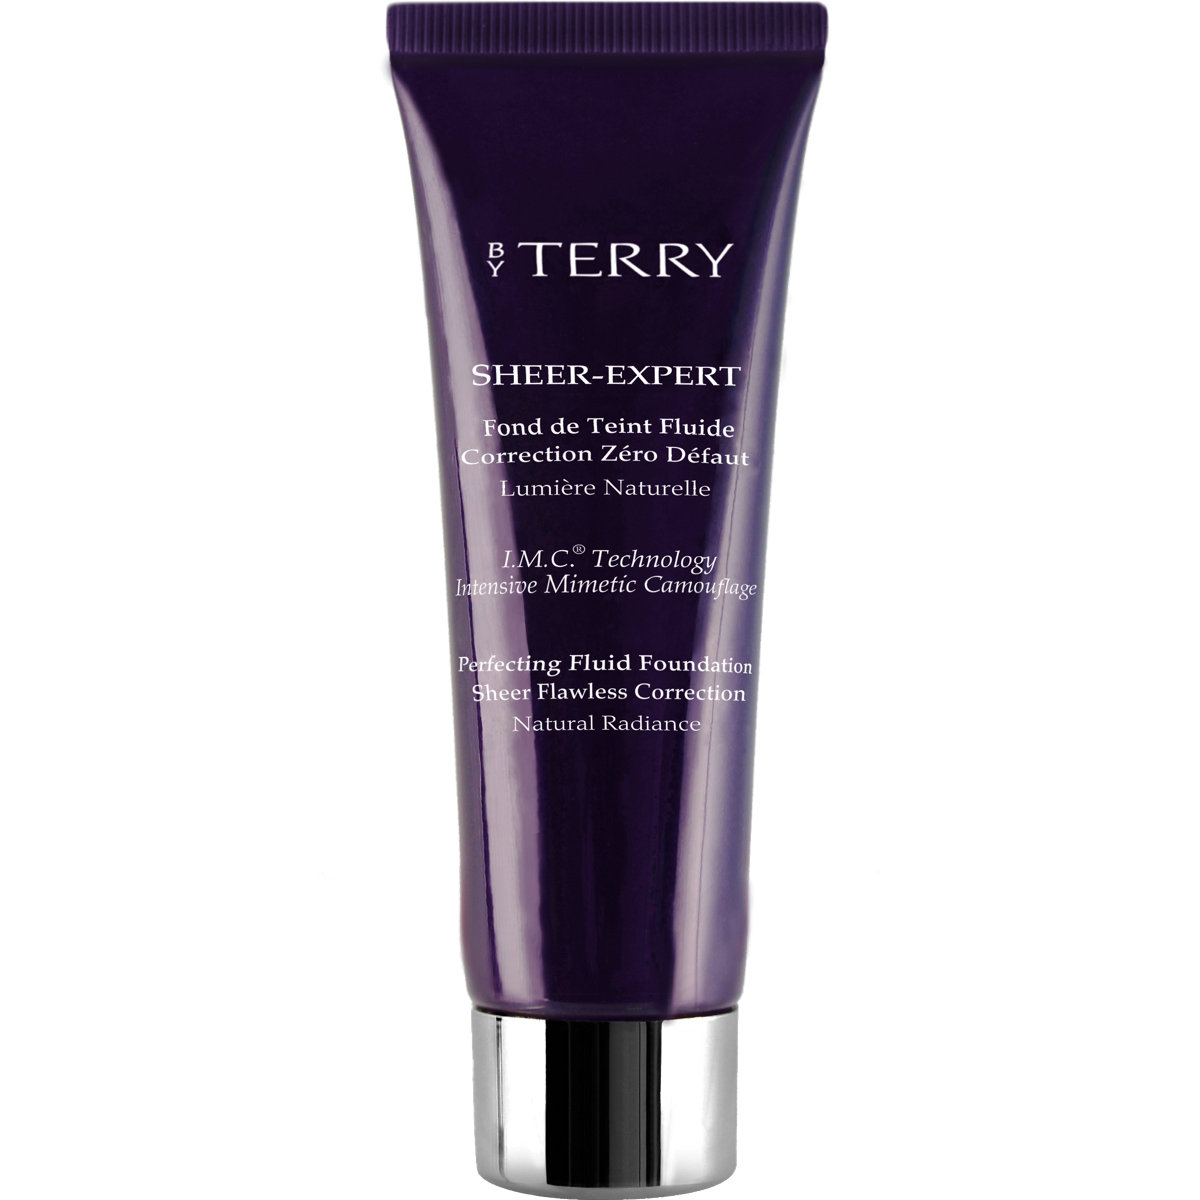 By Terry Sheer Expert Perfecting Fluid Foundation Sheer Flawless Correction